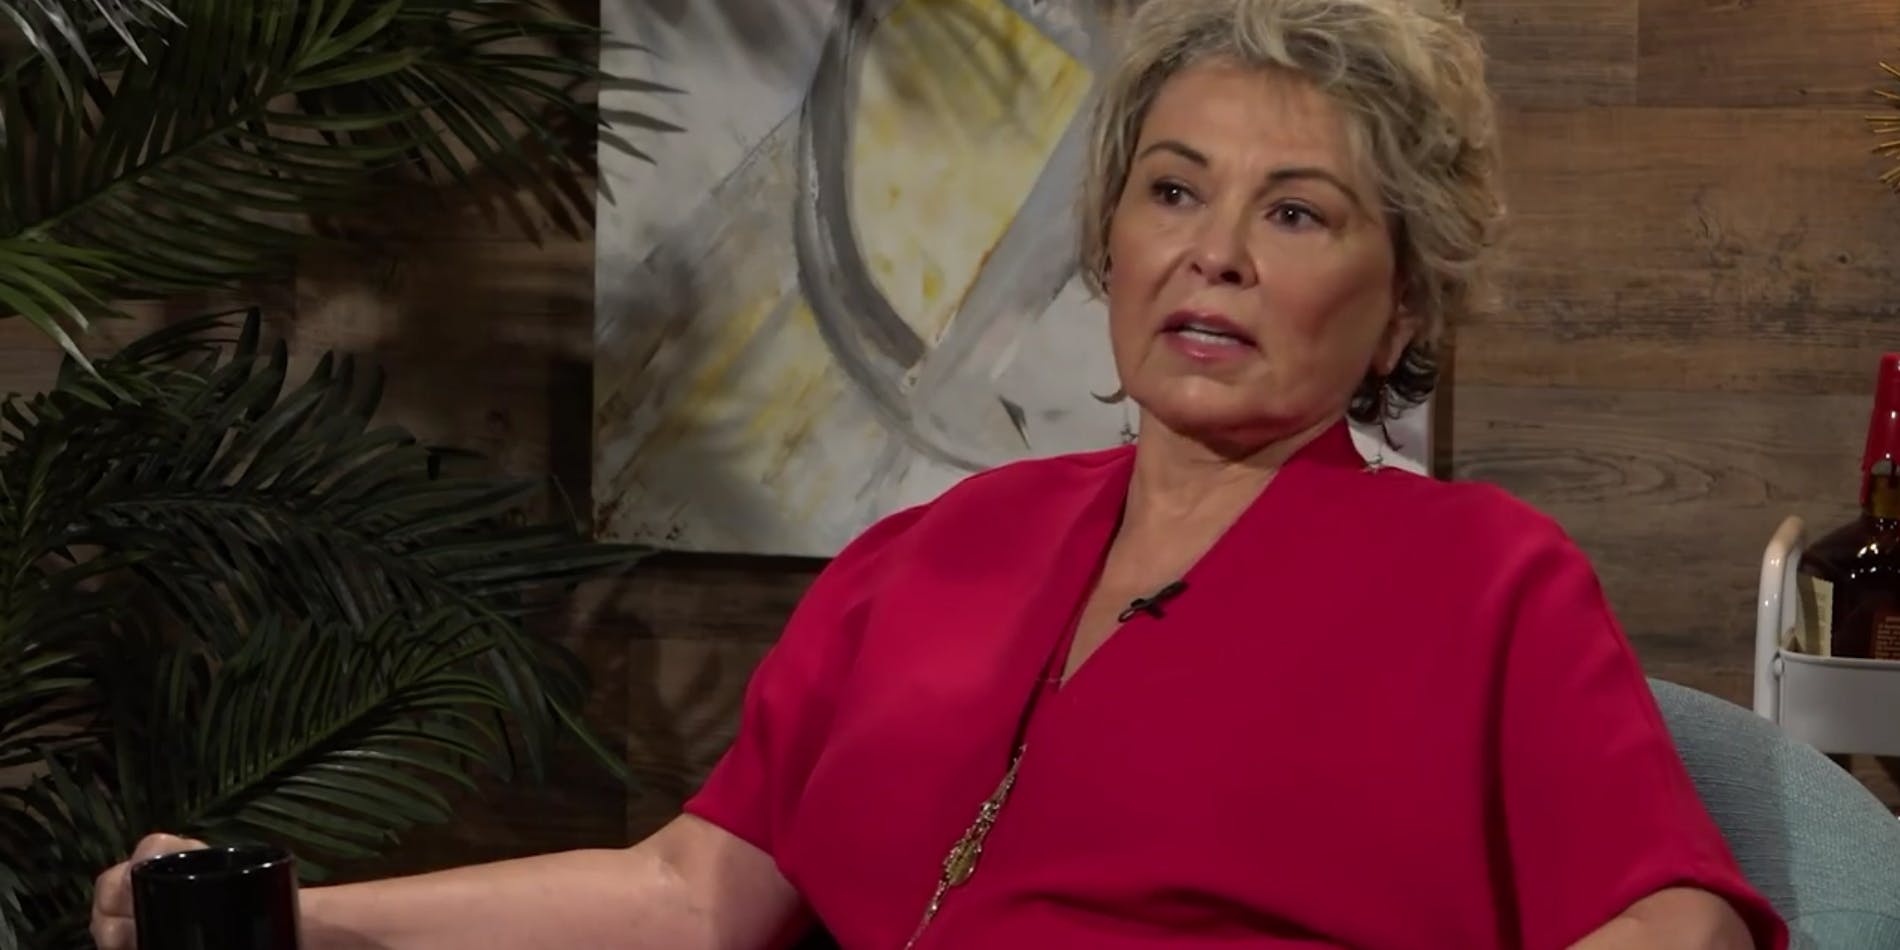 After Roseanne Barr blamed her racist Twitter comments on Ambien, the drug's maker fired back with criticism.